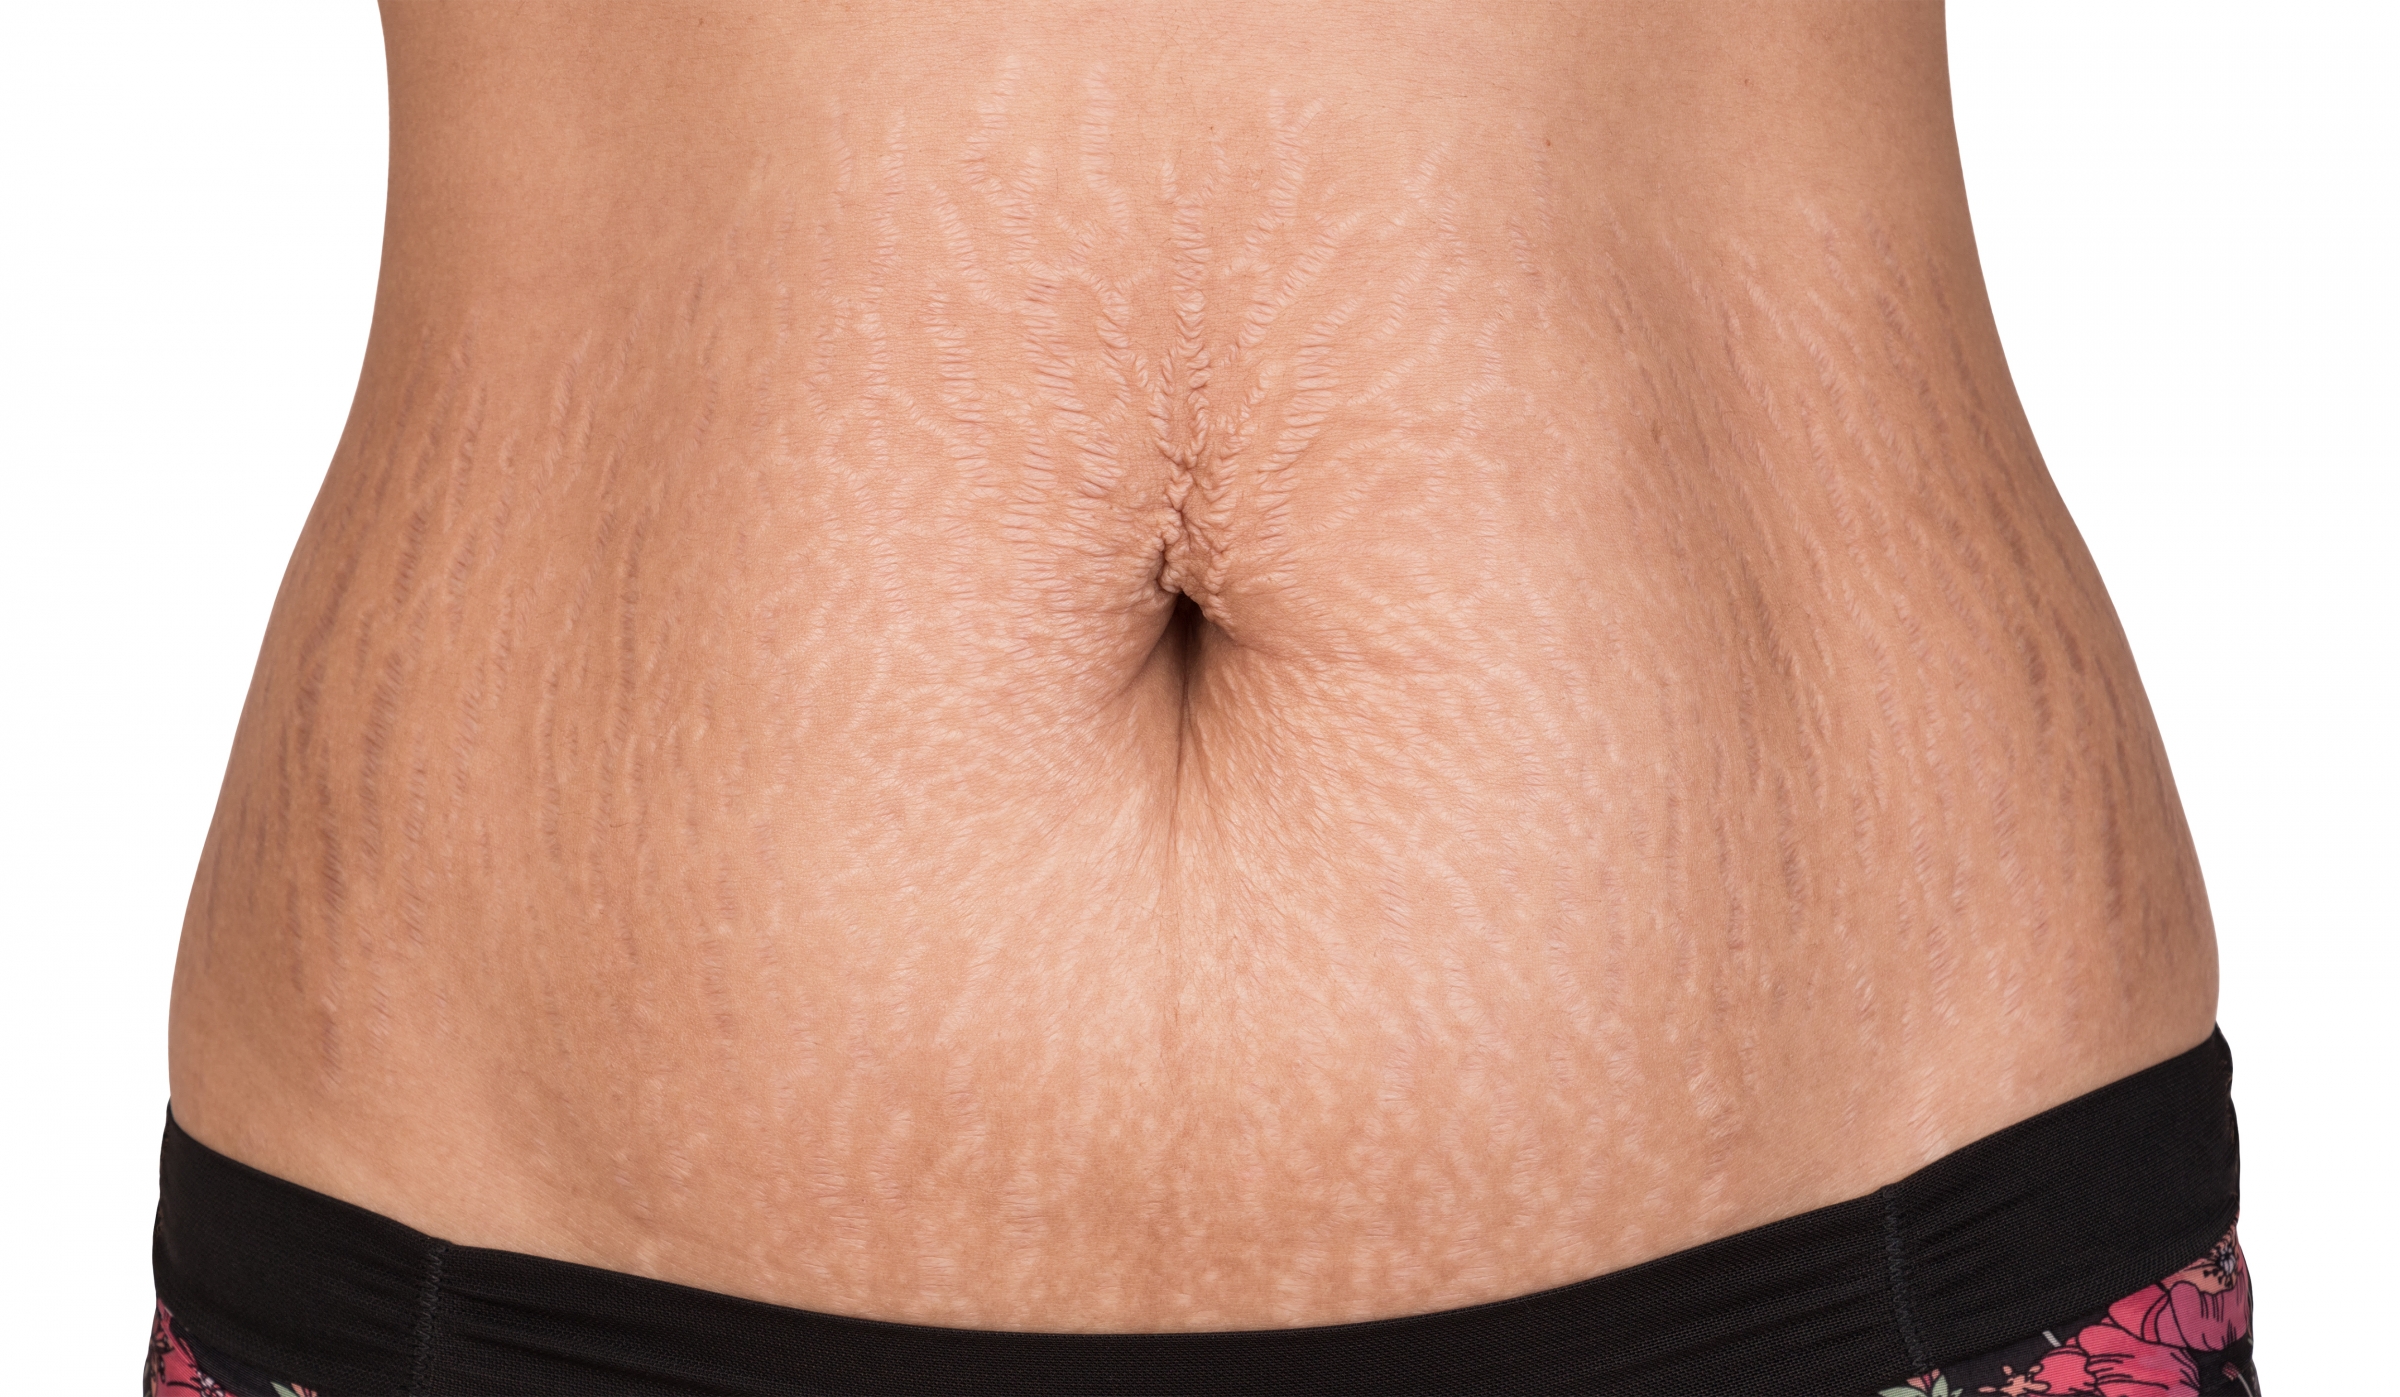 Stretch marks cannot be treated, but they can be removed during a body contouring procedure. To learn more in Southern Florida, contact the Weston Center for Aesthetic Medicine & Surgery today